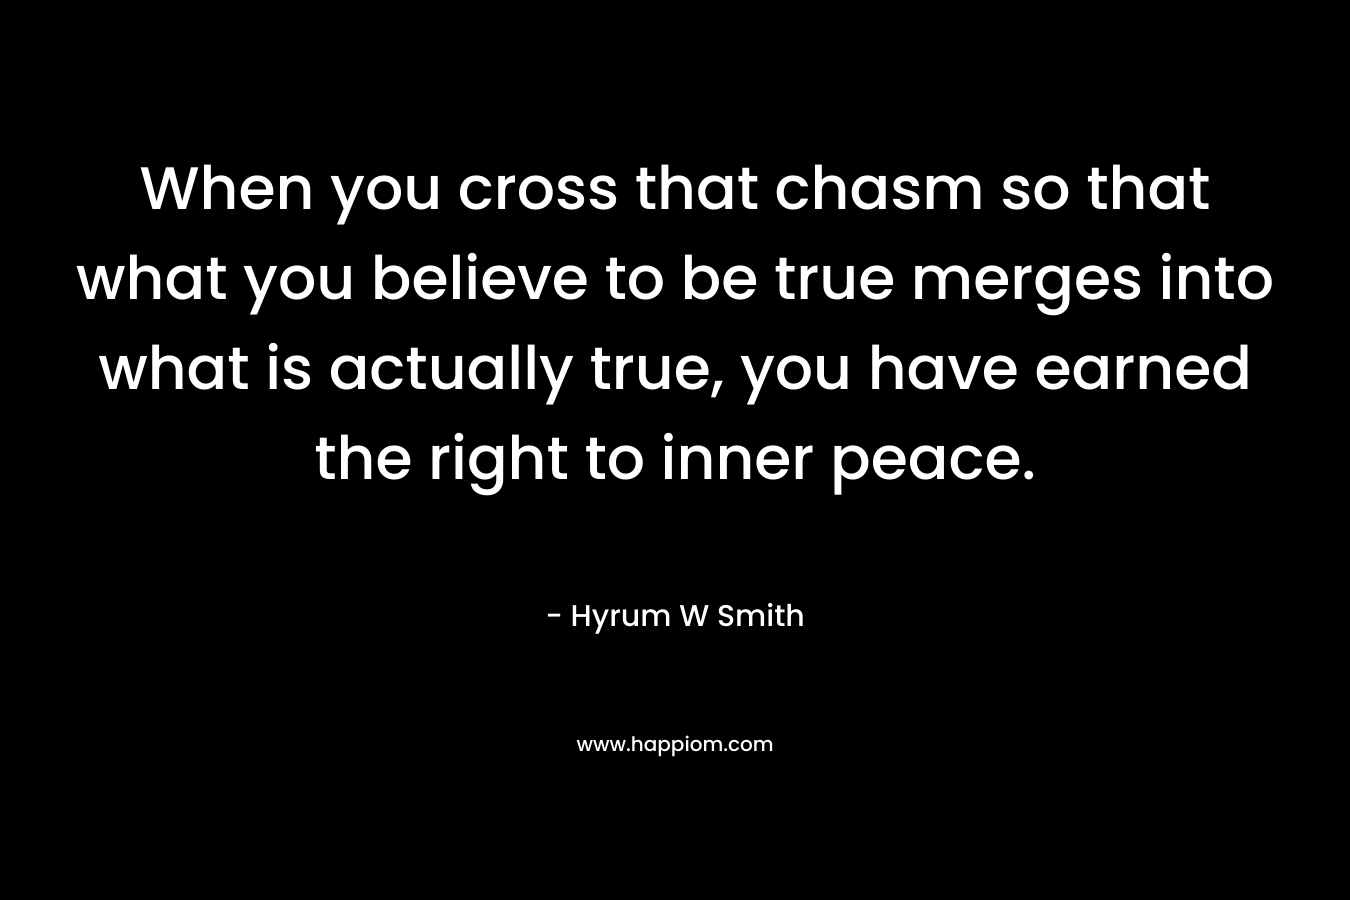 When you cross that chasm so that what you believe to be true merges into what is actually true, you have earned the right to inner peace.